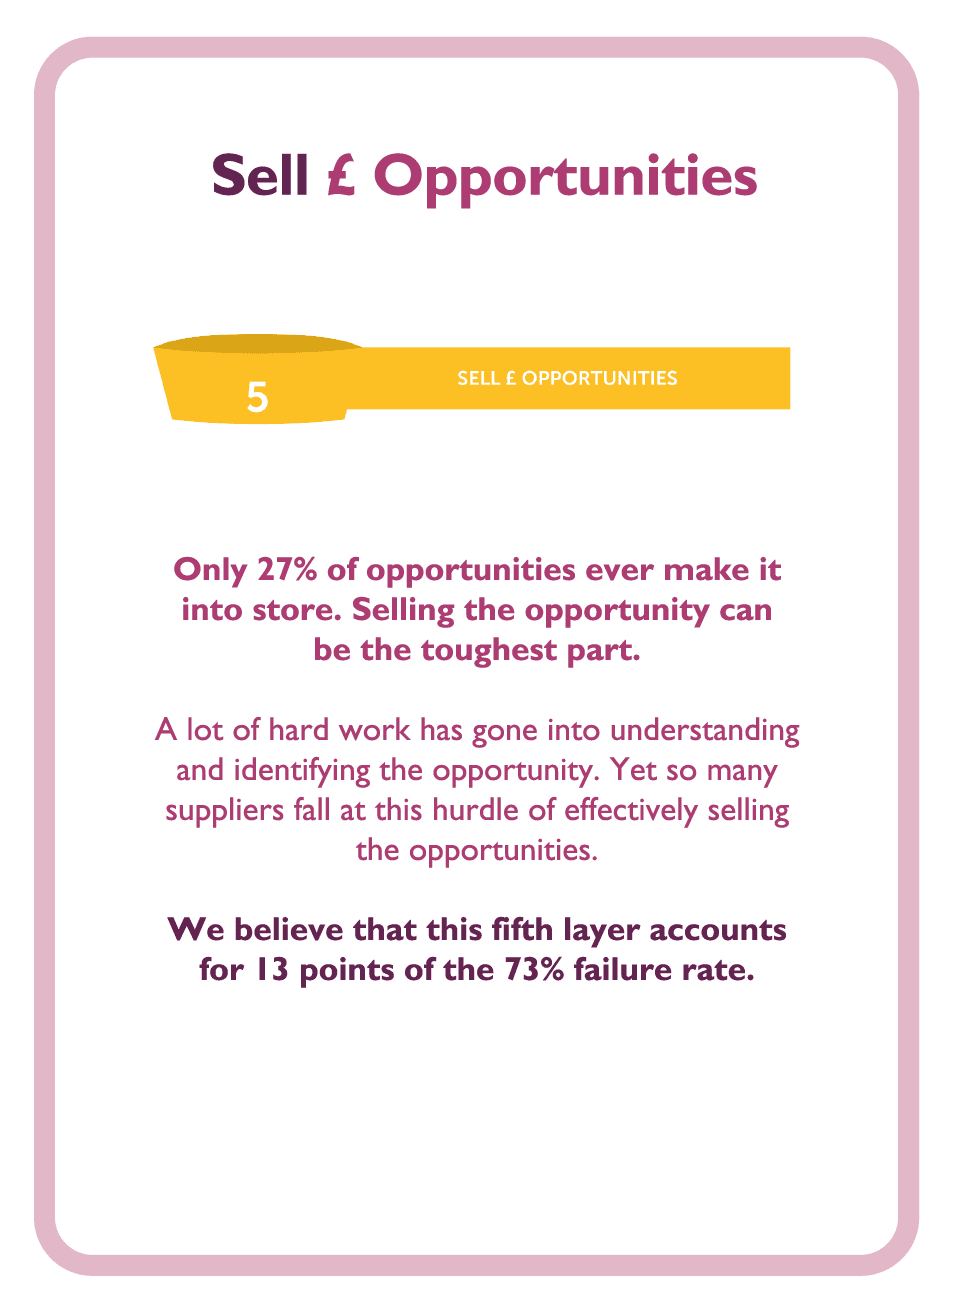 Negotiation coaching card titled Sell £ Opportunities